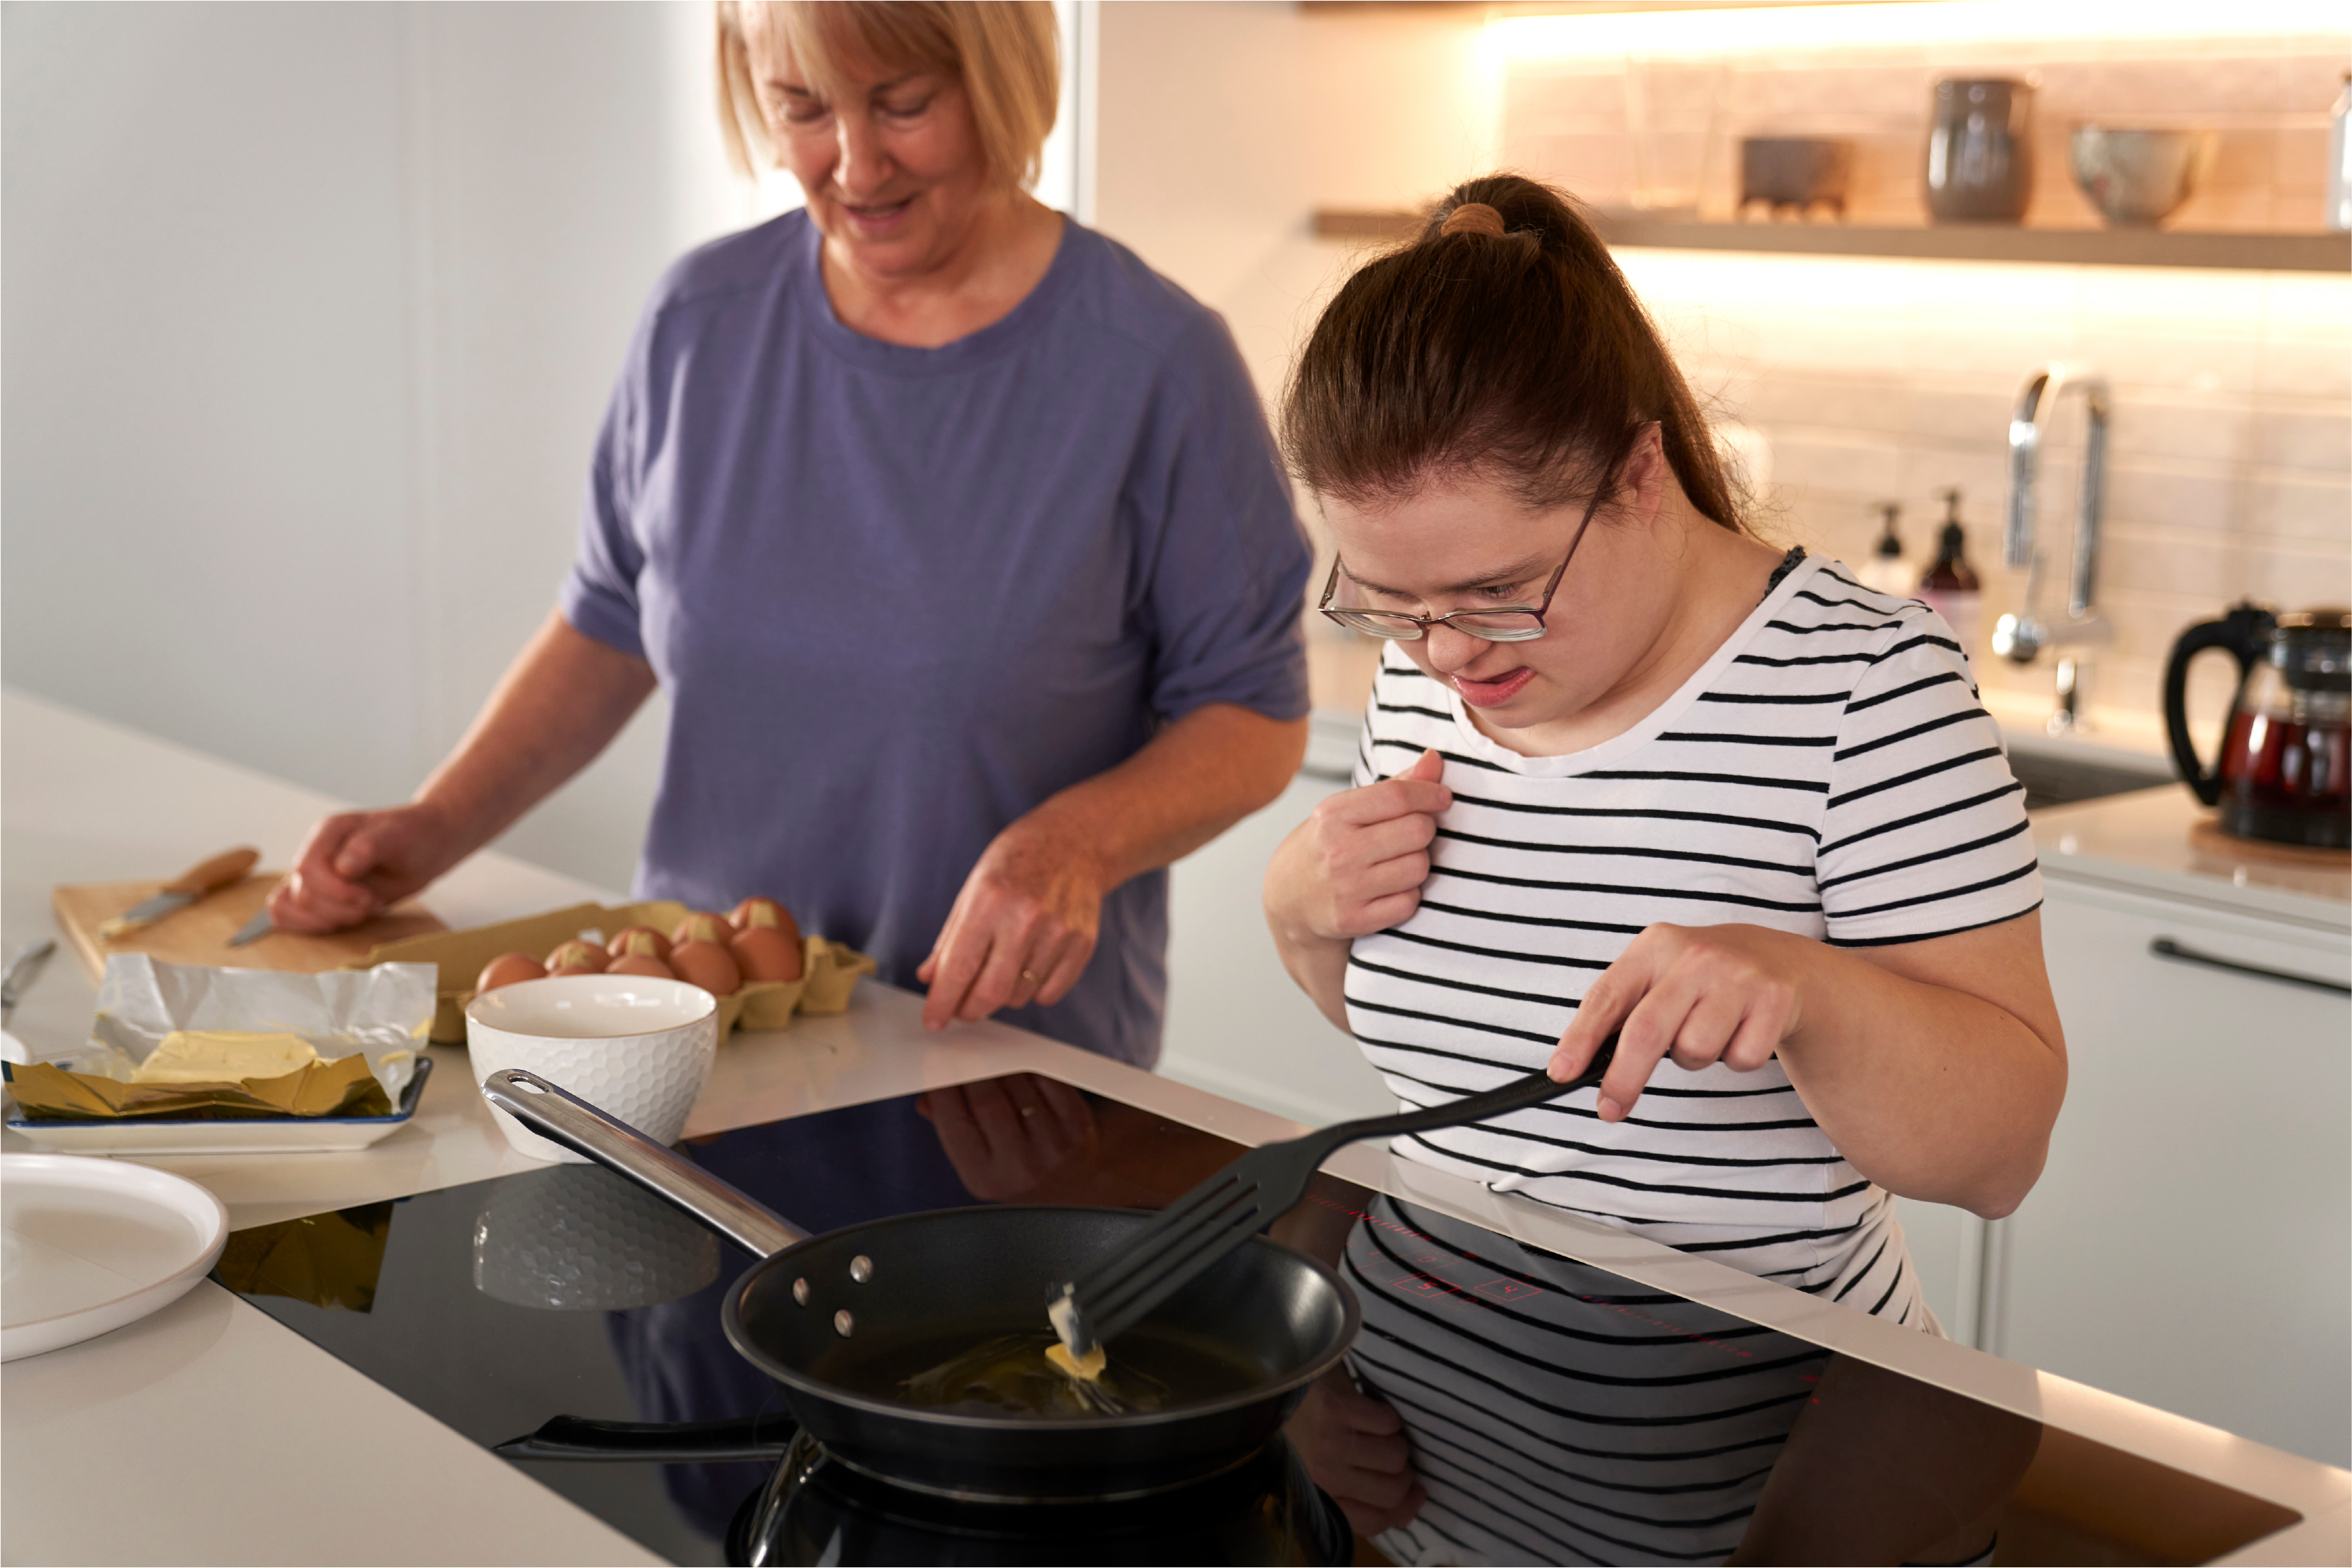 "An older woman with short hair helps a younger woman cooking at the stove"